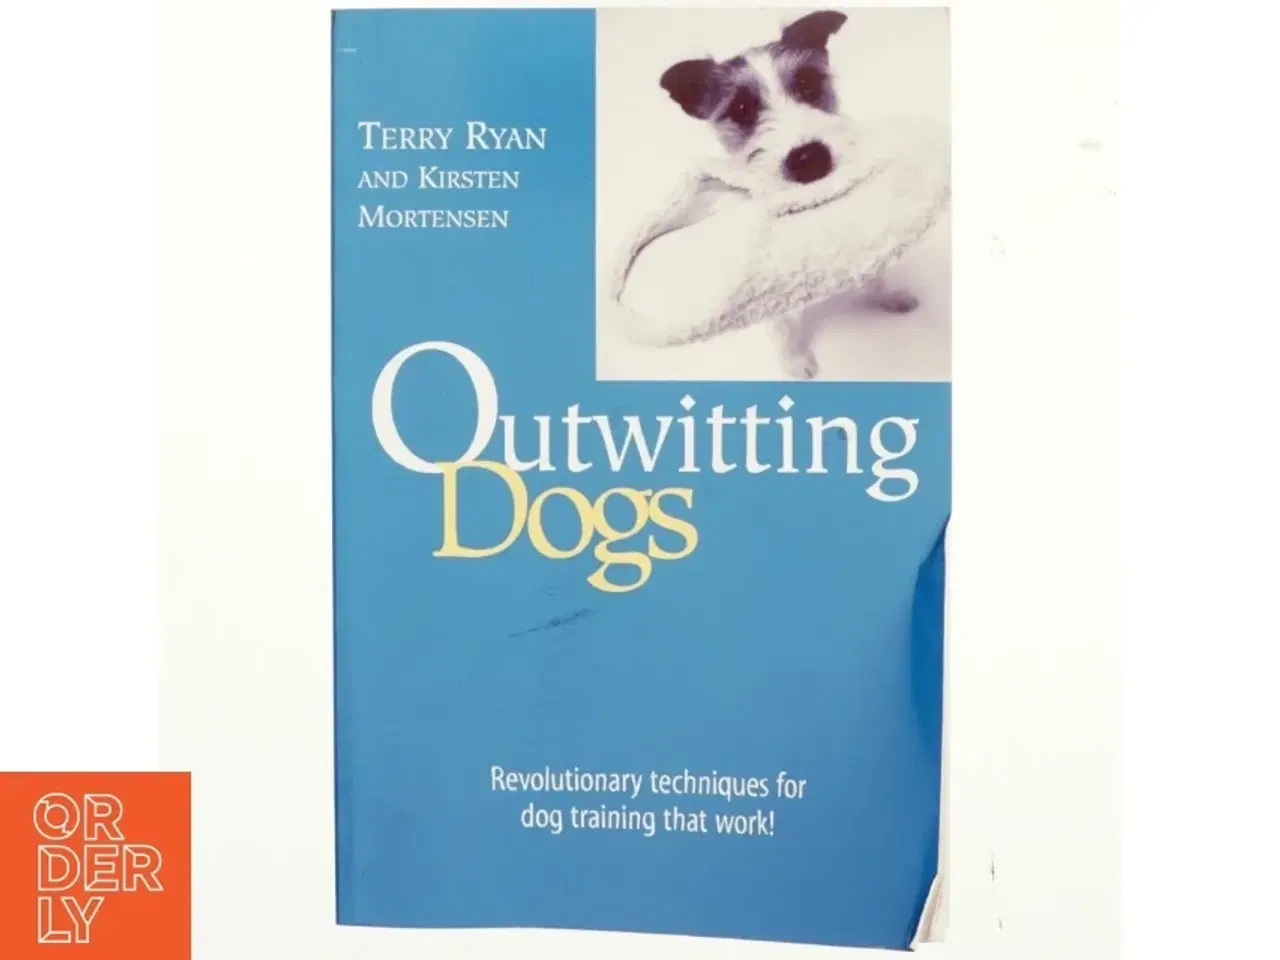 Billede 1 - Outwitting dogs af Terry Ryan